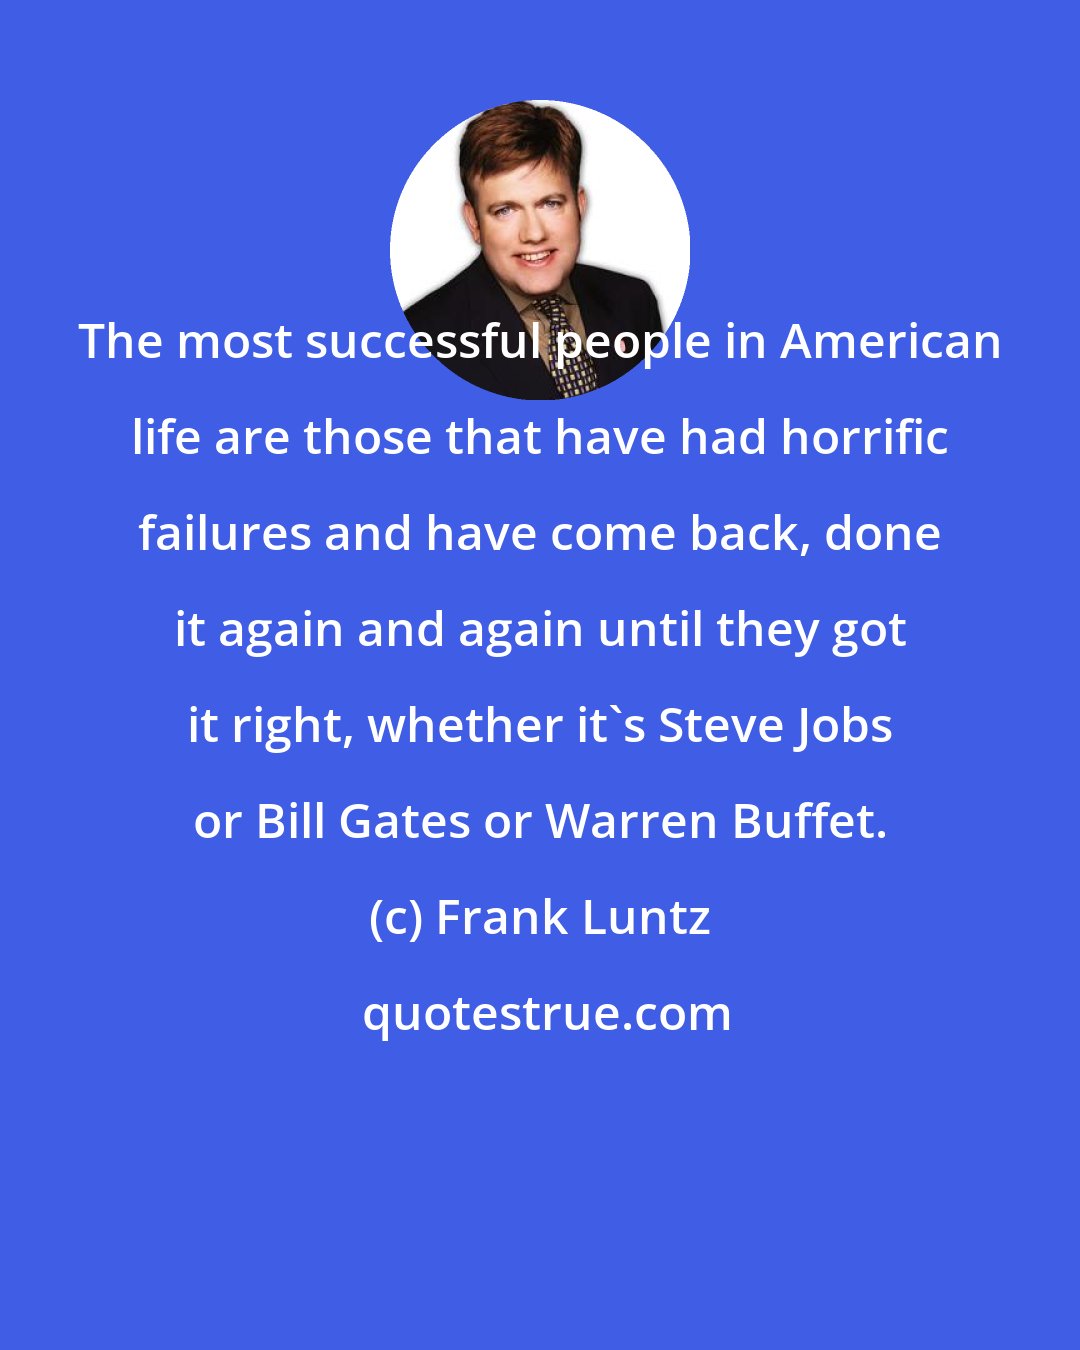 Frank Luntz: The most successful people in American life are those that have had horrific failures and have come back, done it again and again until they got it right, whether it's Steve Jobs or Bill Gates or Warren Buffet.